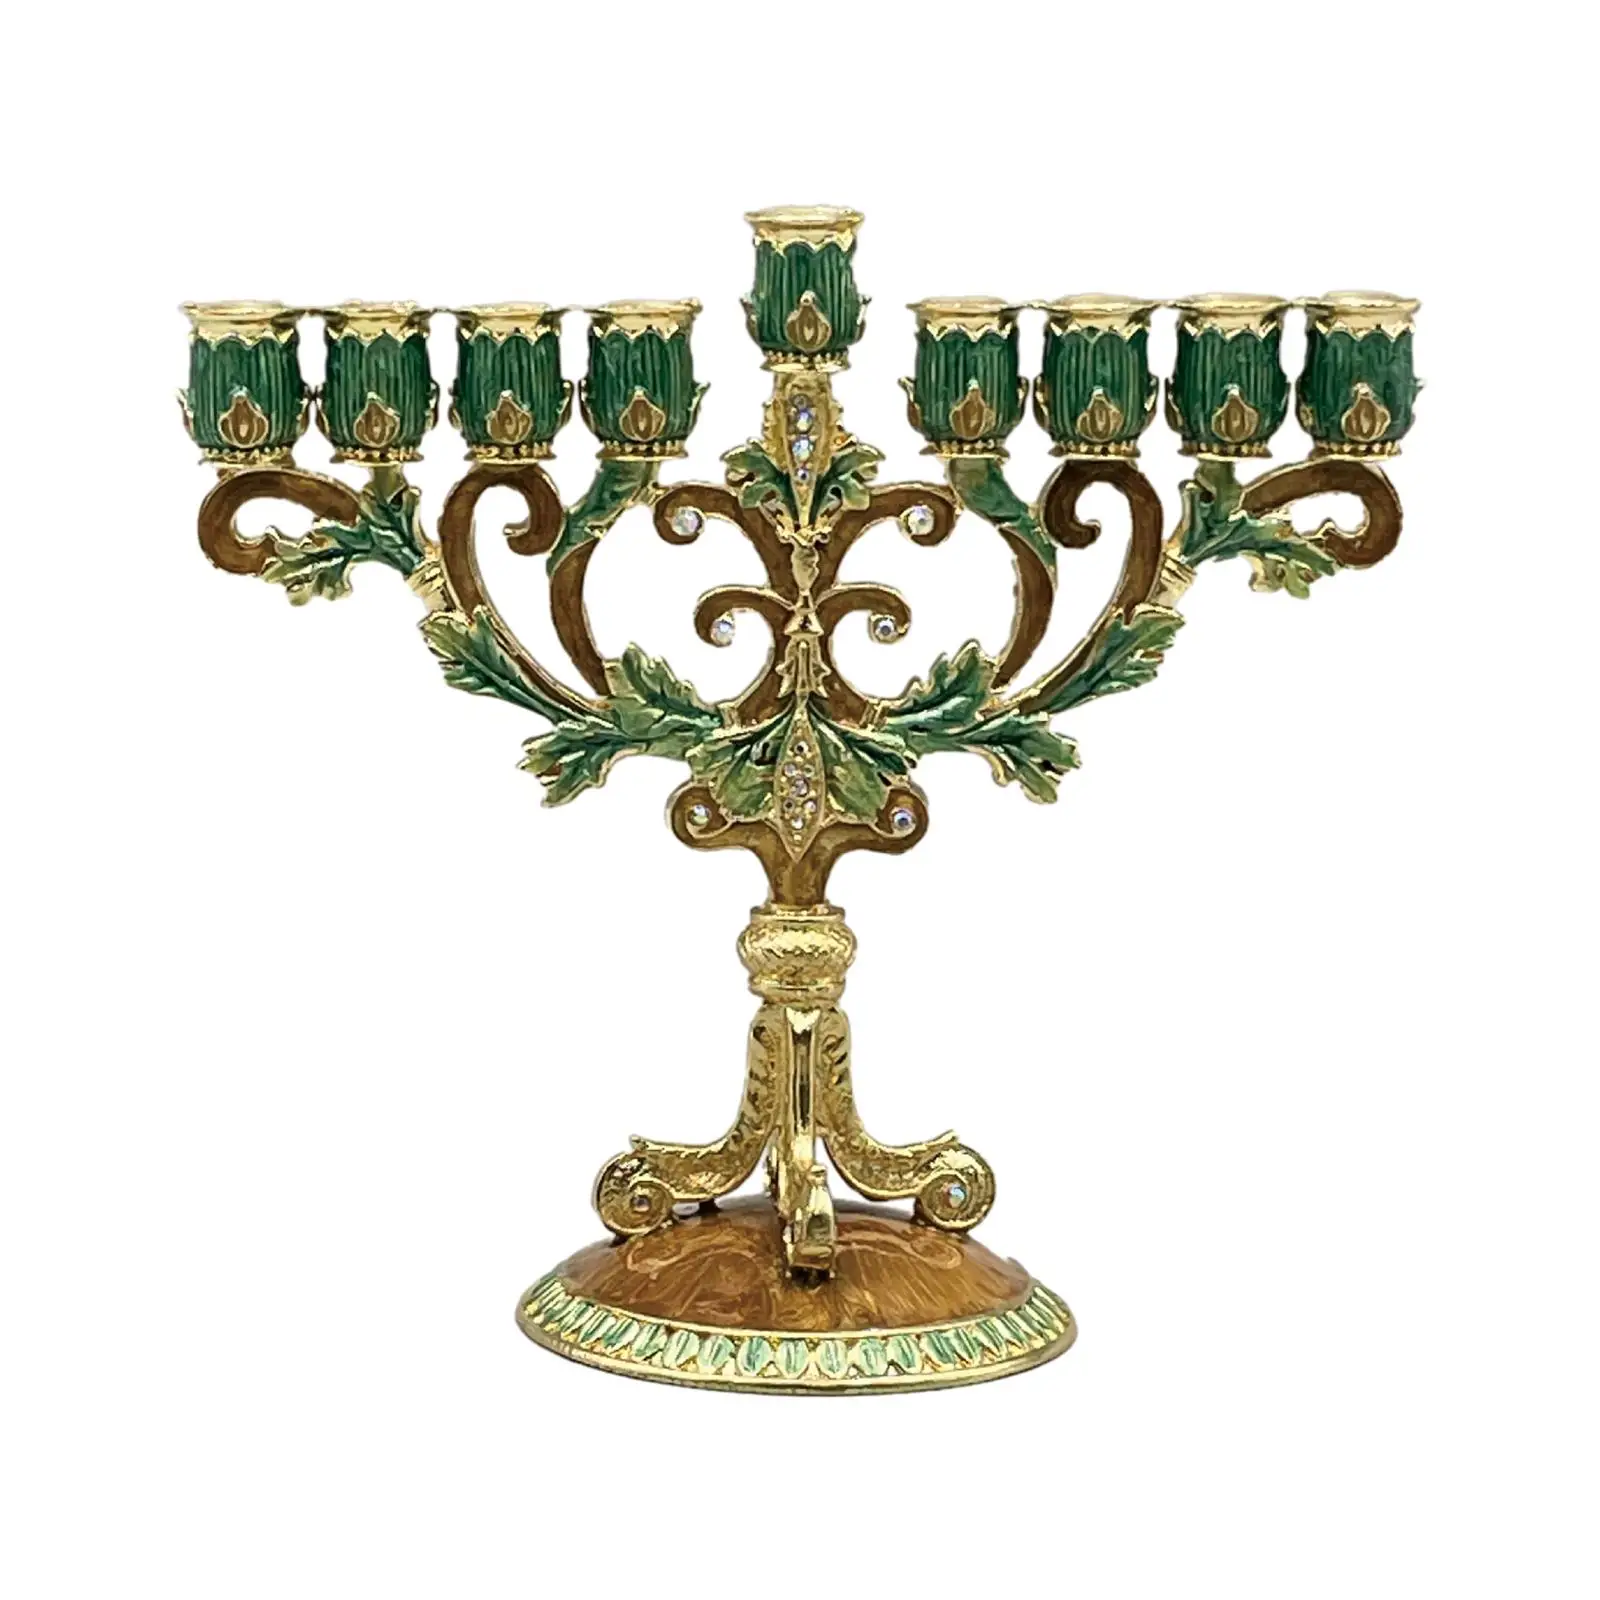 Hanukkah Menorah 9 Branches Candle Holder Metal Round Base Taper Candle Holders for Fireplace Festival Mantel Dining Room Decor